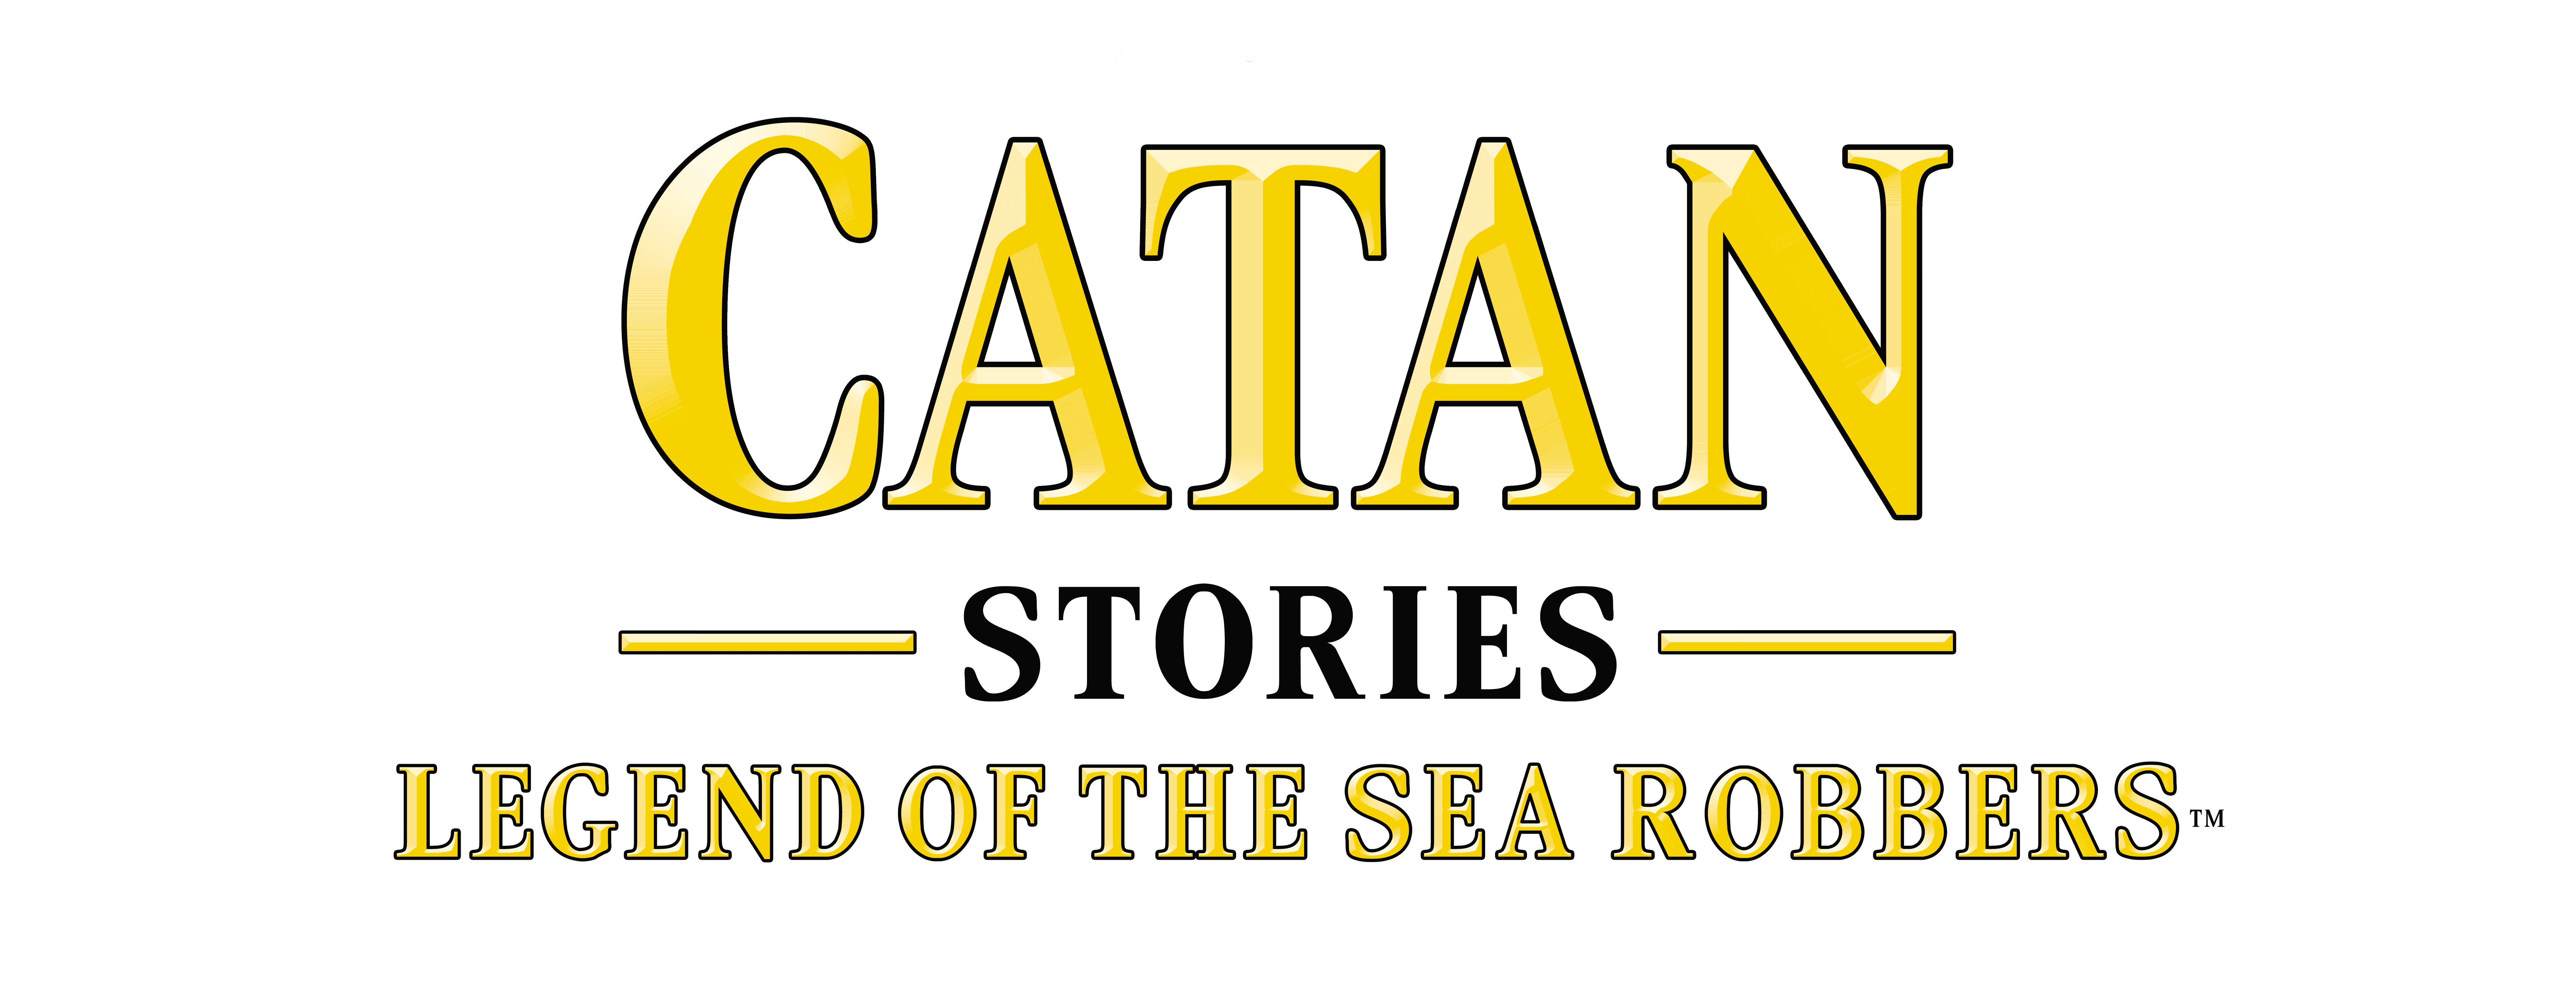 Catan Logo - Catan Stories: Legend of the Sea Robbers Is Out Now On iOS And Android